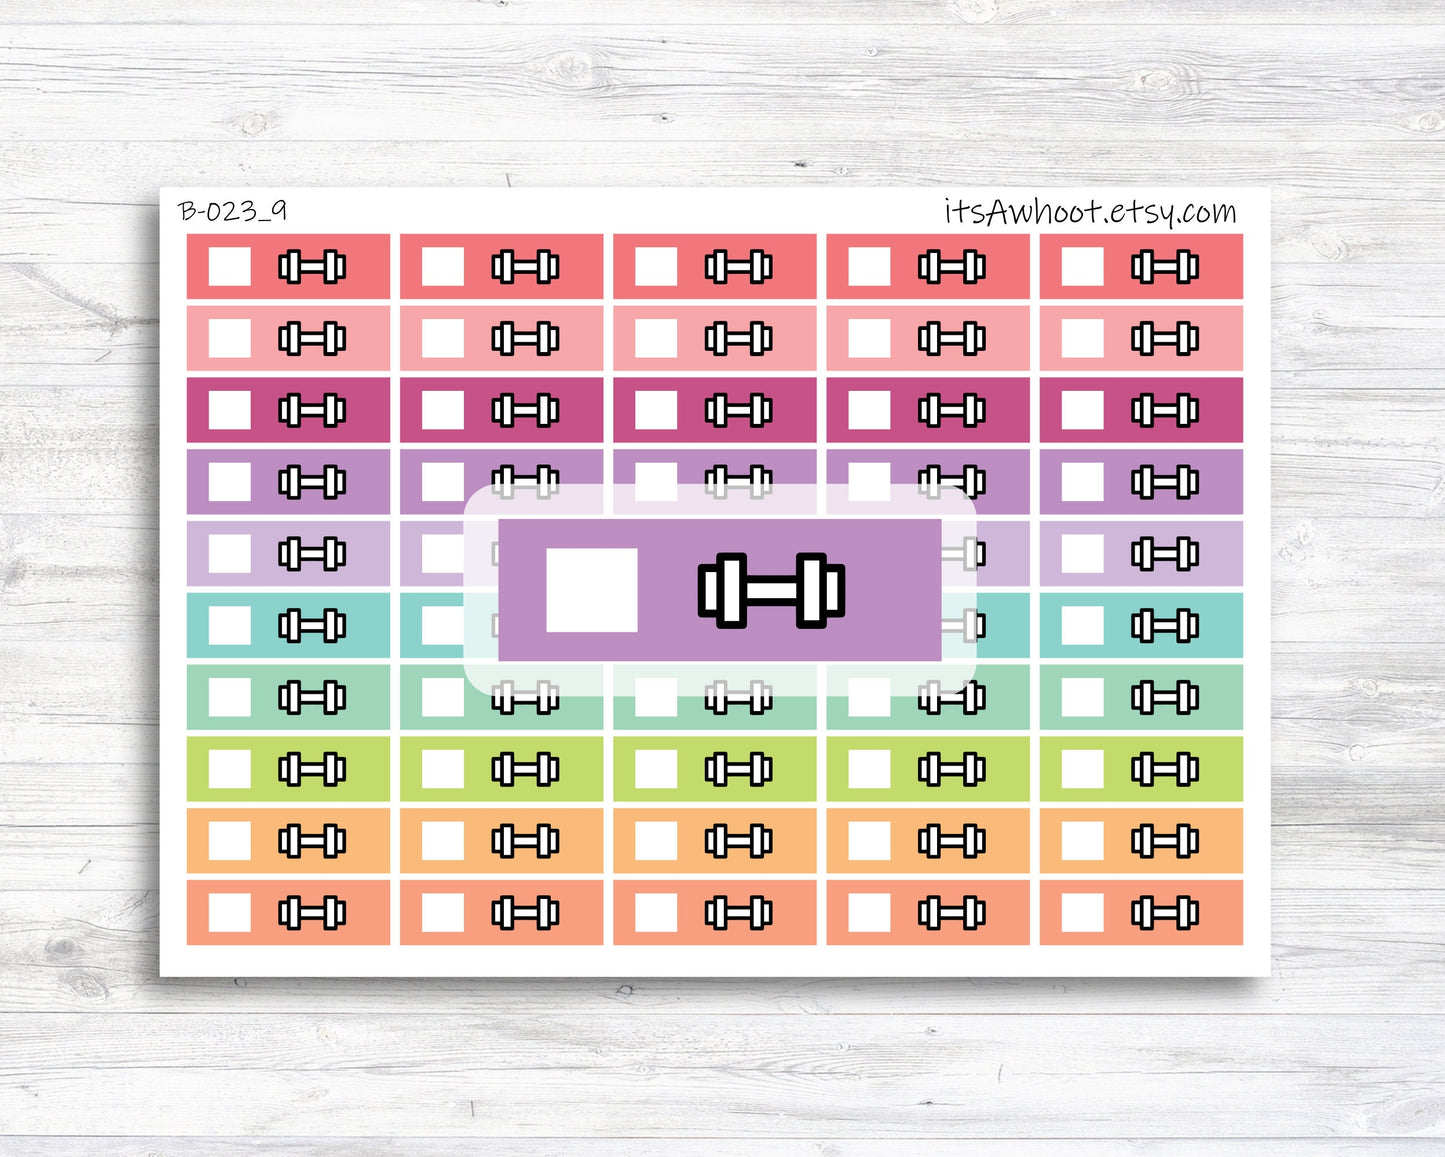 Barbell Check Off Tracker Stickers - Small Labels (B023_9)